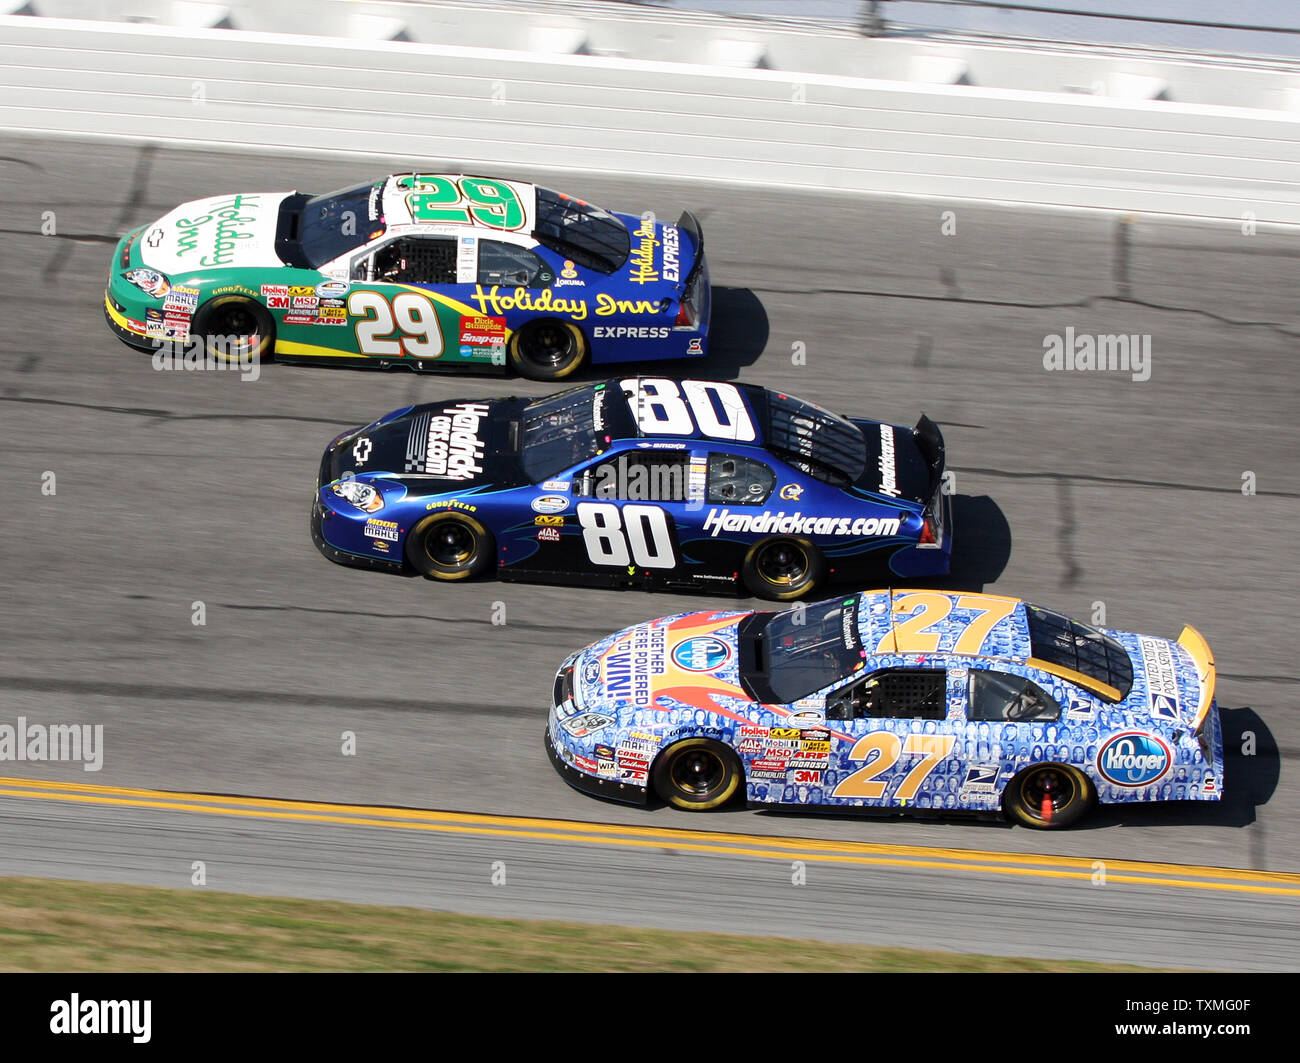 Clint Bowyer (29), Tony Stewart (80) and Jason Keller (27) go three wide in turn three during the NASCAR Nationwide series Camping World 300 at Daytona International Speedway in Daytona Beach, Florida on February 14, 2009. Stewart went on to win the race. (UPI Photo/Malcolm Hope) Stock Photo